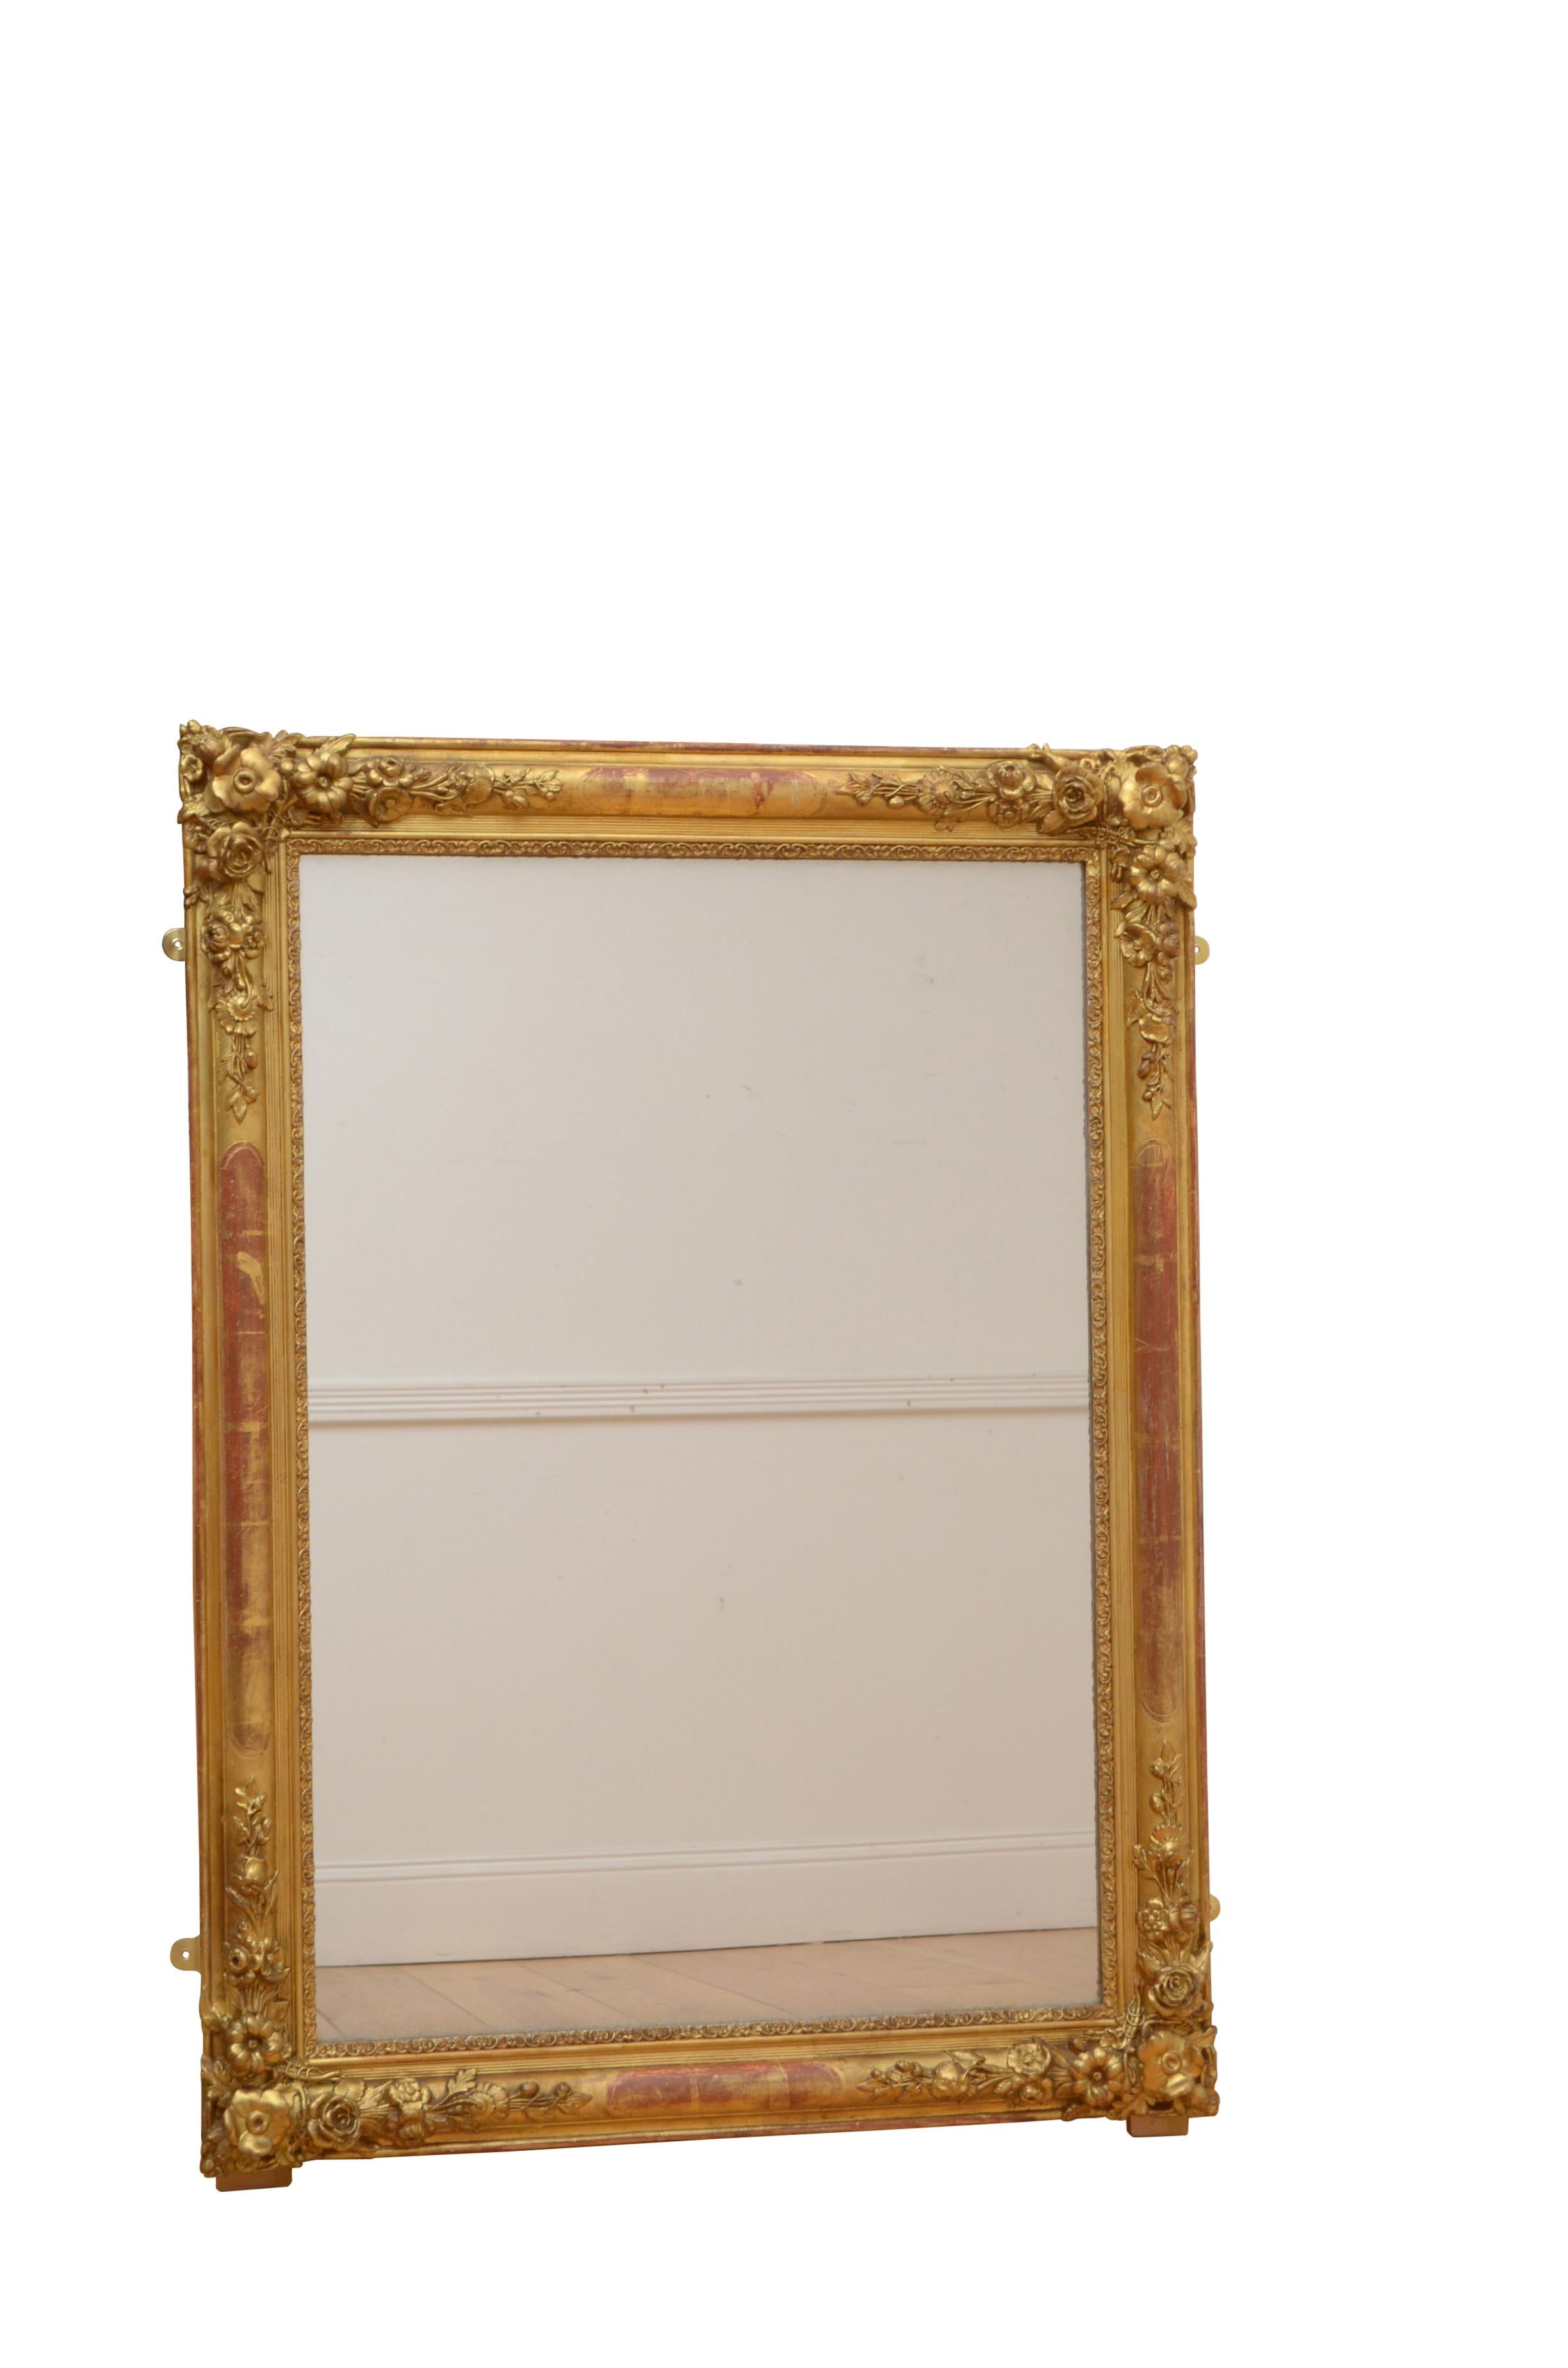 0233 outstanding French gilded wall mirror of versatile form, can be positioned horizontally or vertically, having original glass with characterful air bubbles, sparkle and minor silvering in moulded giltwood frame with flower carved corners. This